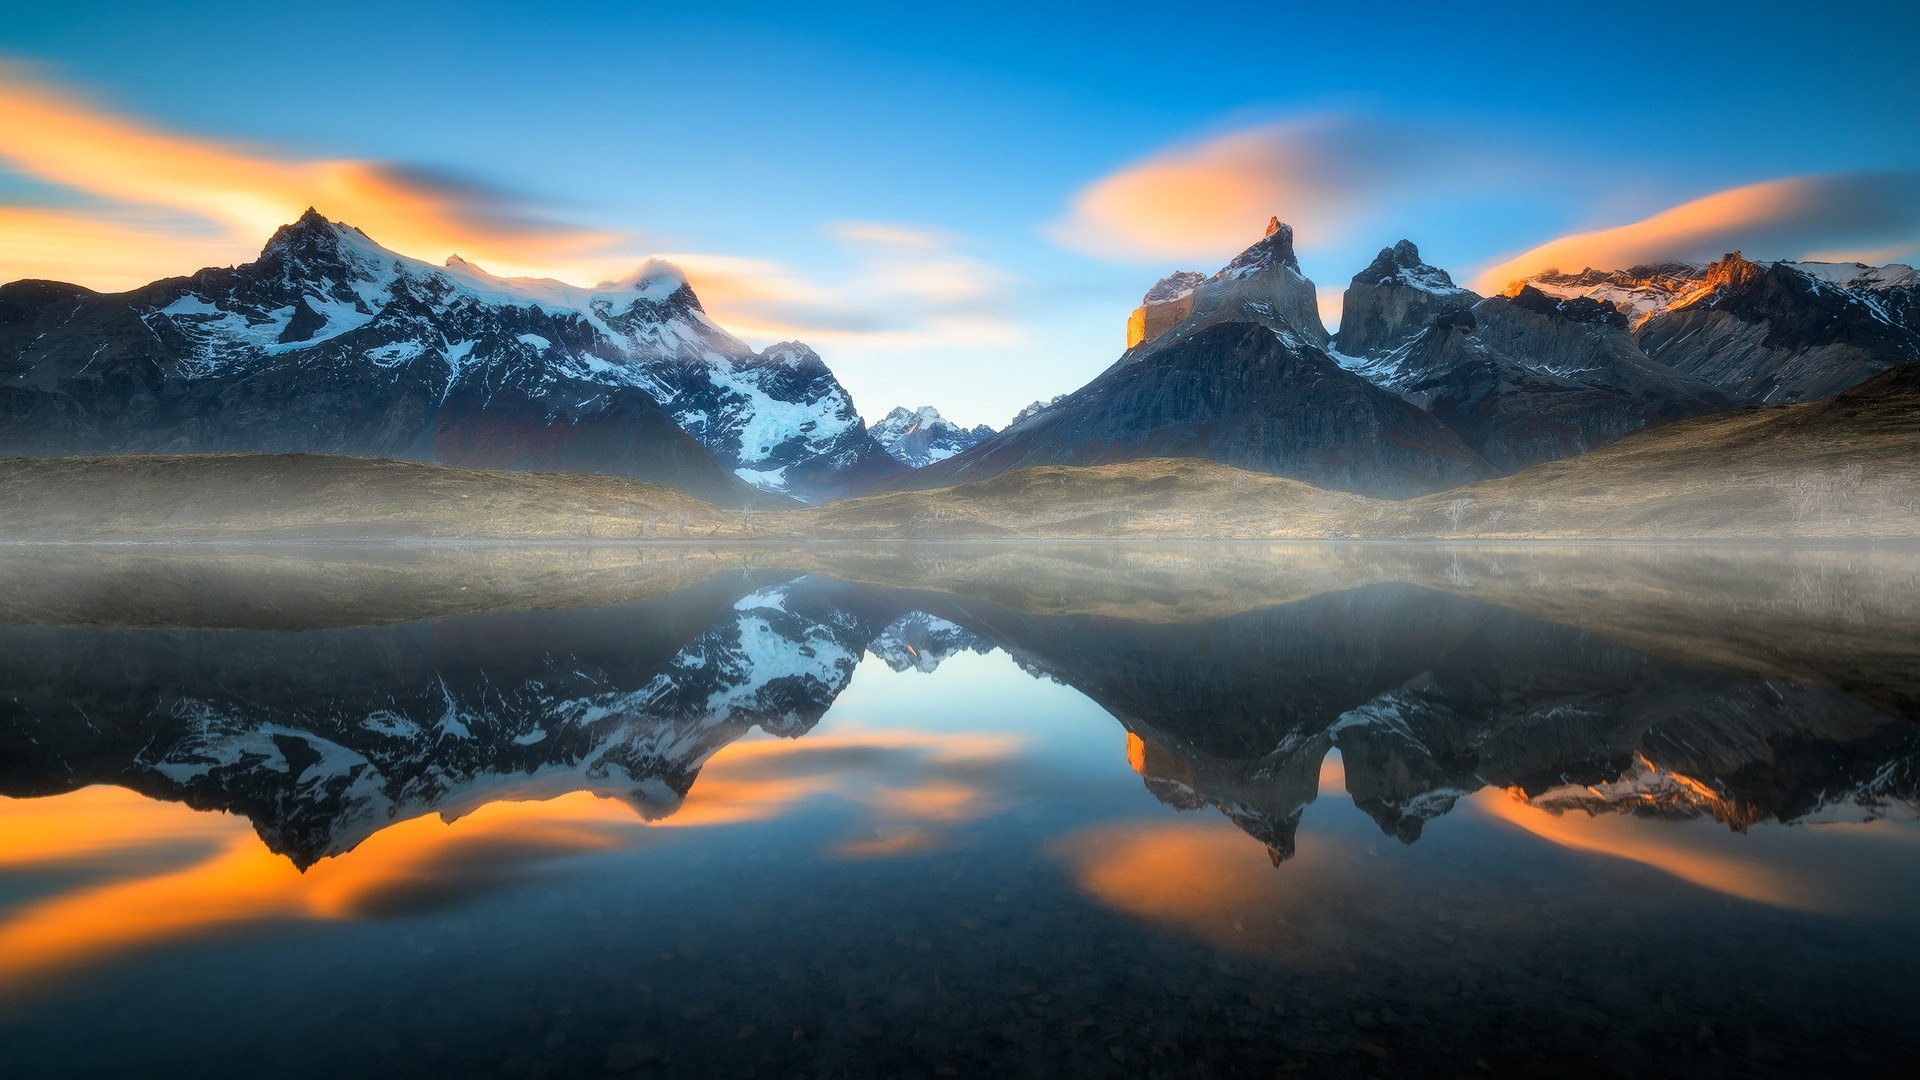 General 1920x1080 nature mist landscape sunset mountains lake reflection Torres del Paine Chile water snowy peak clouds cyan sunlight South America